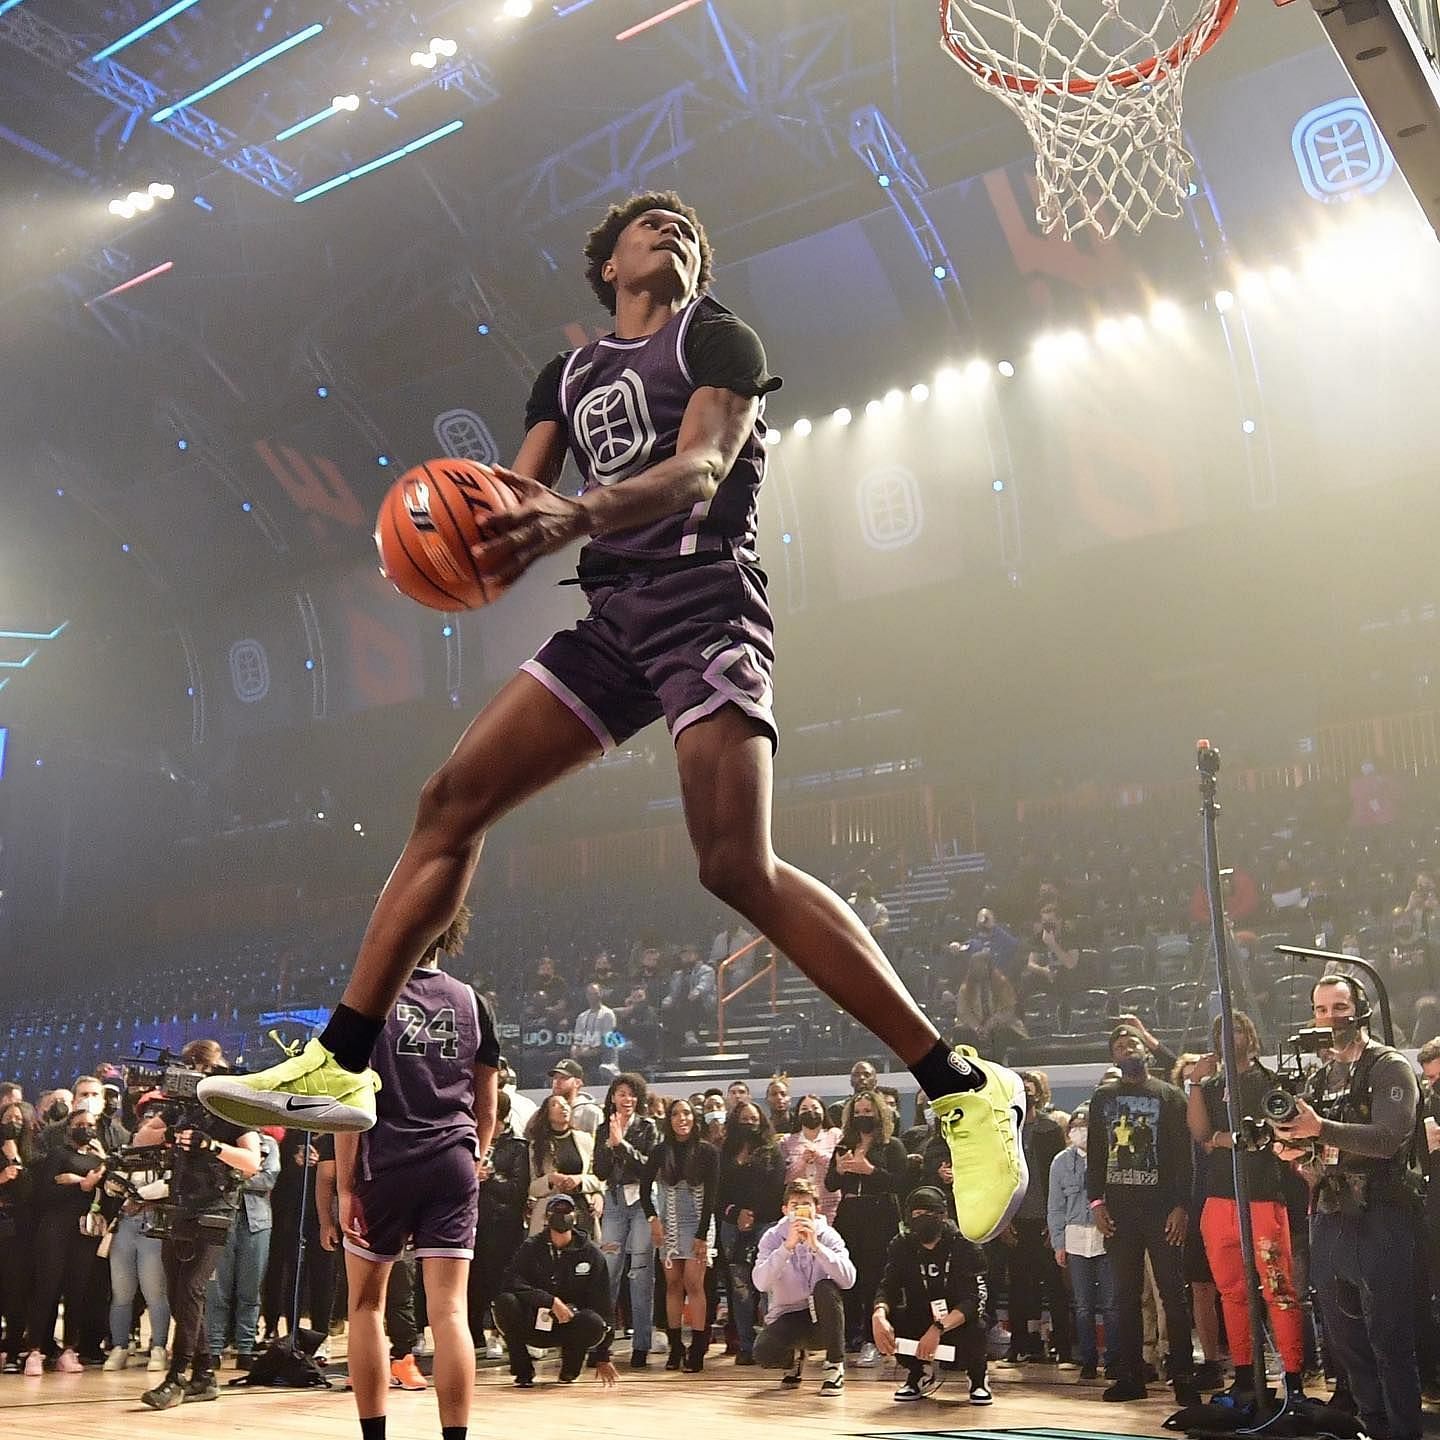 Ausar Thompson participated in the dunk contest of the Overtime Elite League. Via Instagram.